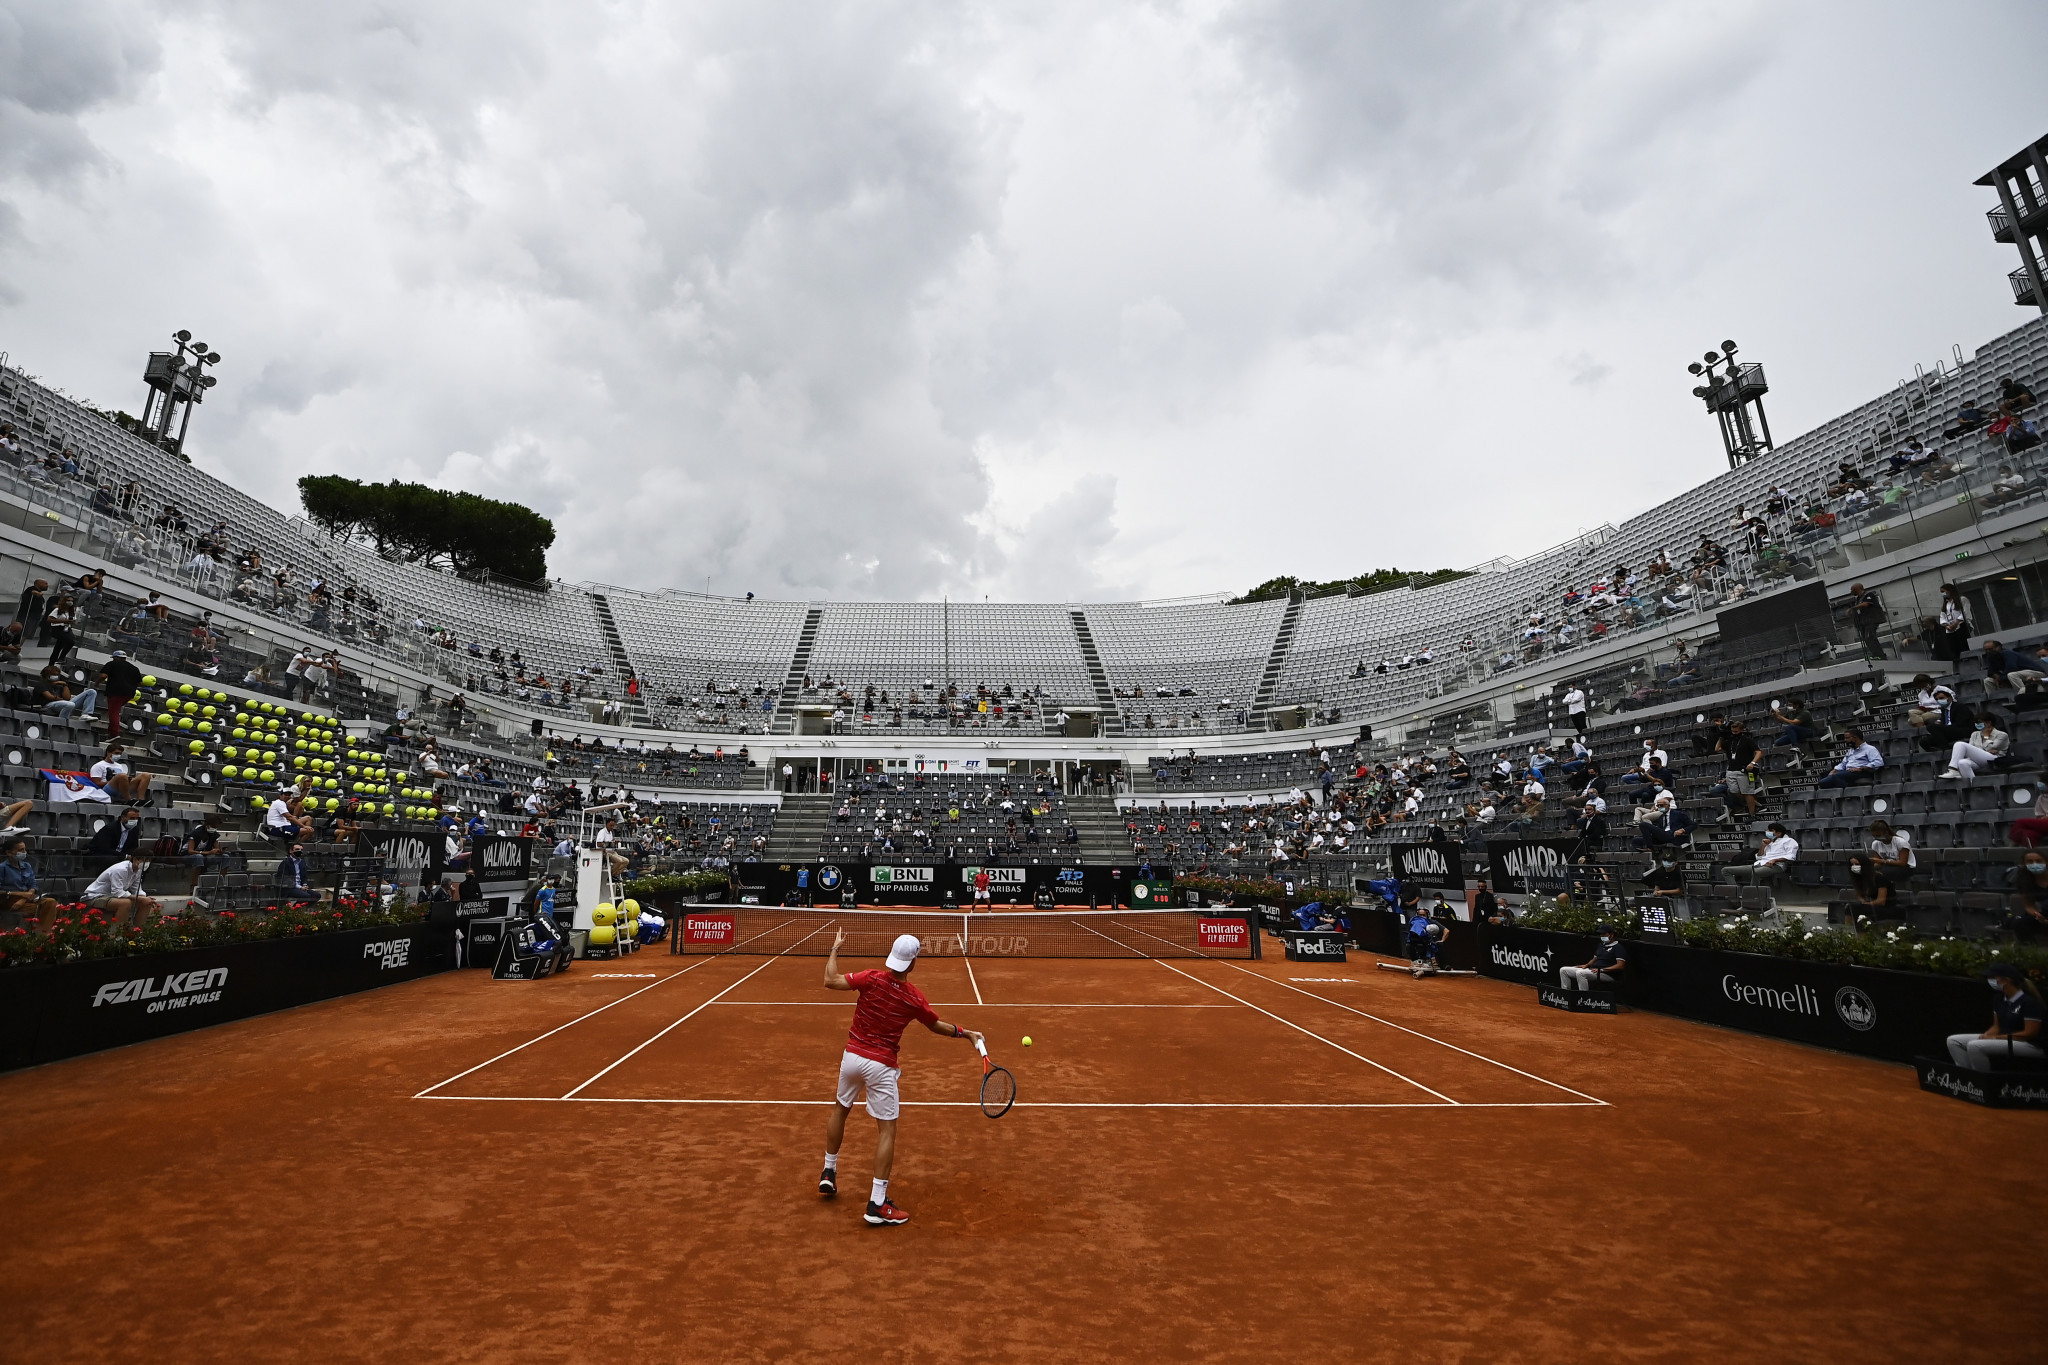 Benito Mussolini authorised the construction of the Foro Italico, with the site now the home of the ATP and WTA Rome Masters each year ©Getty Images